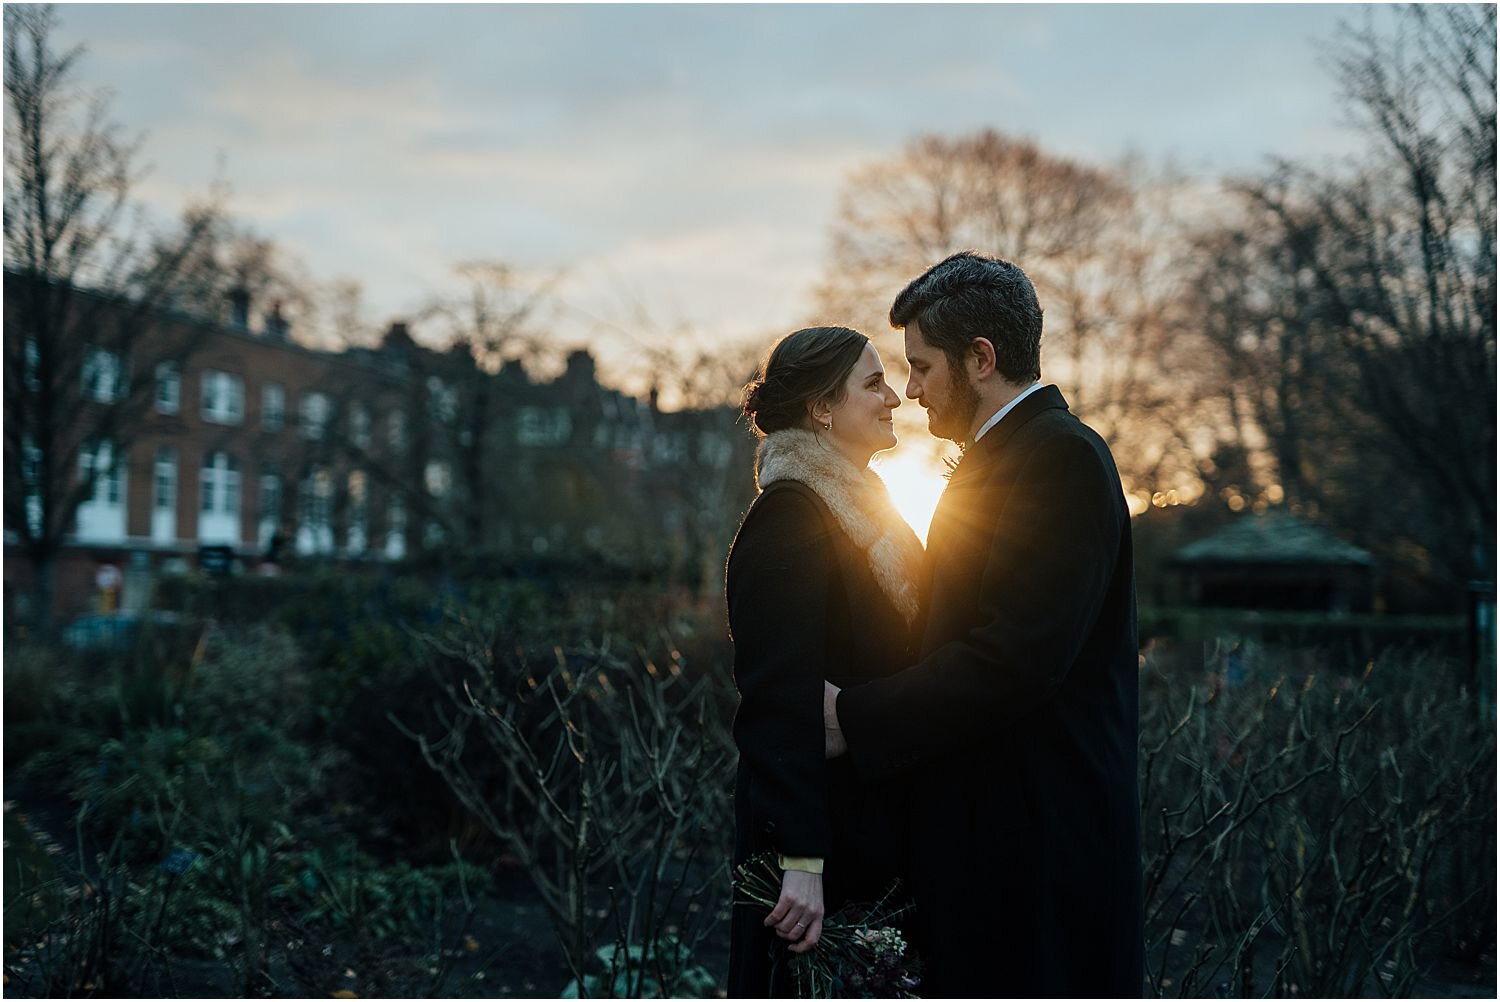 Sunset photo of bride and groom in London park